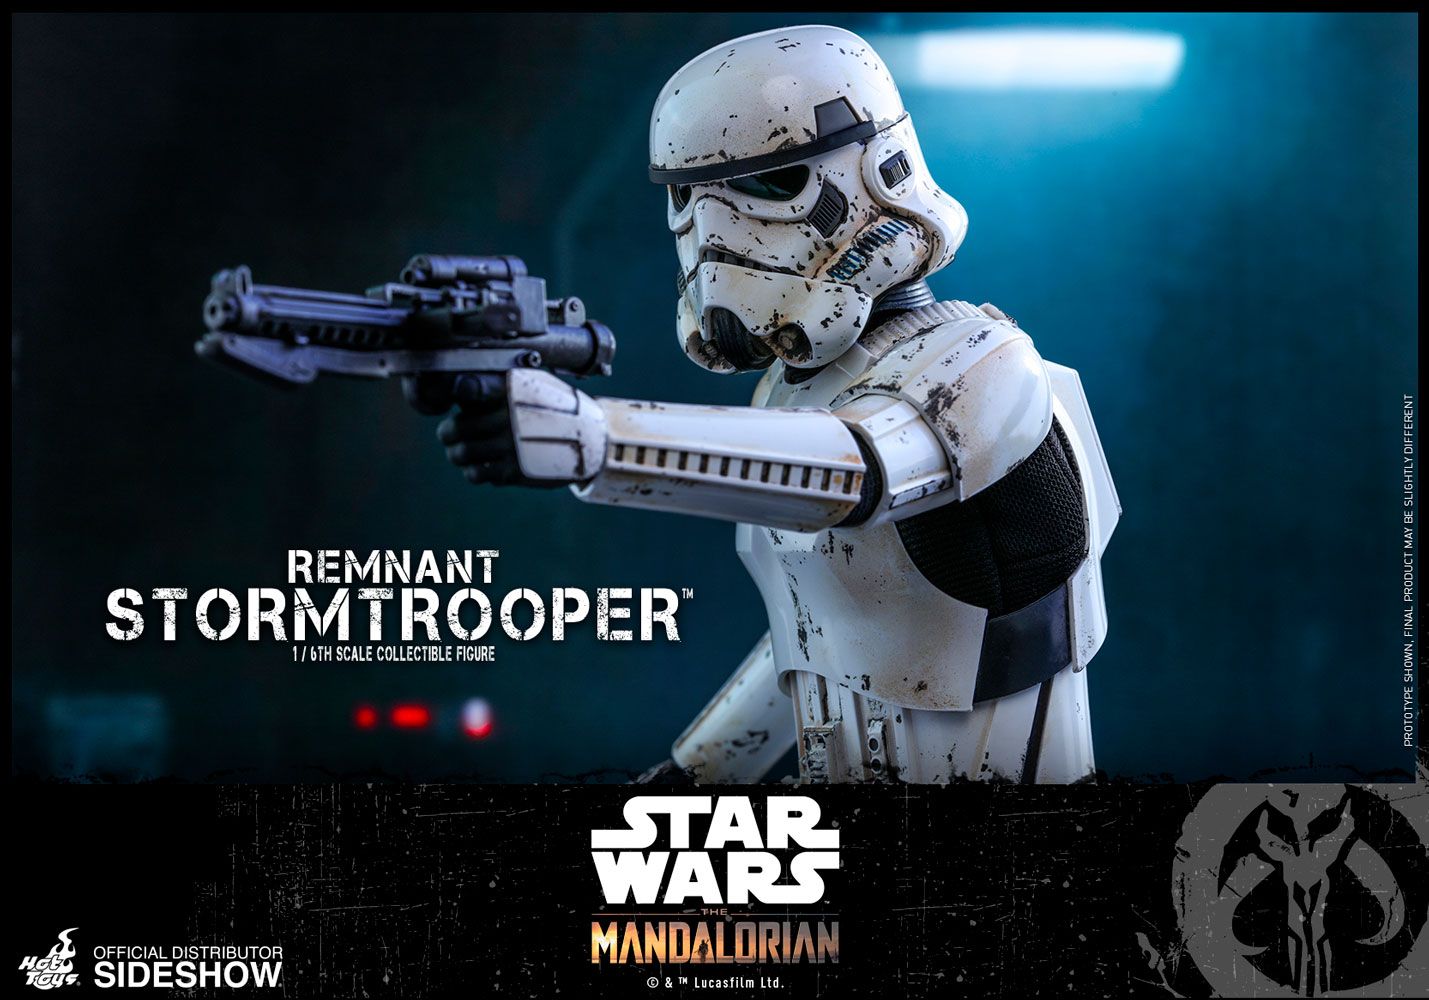 Hot Toys Star Wars Remnant Stormtrooper TMS011 Blaster Rifle loose 1/6th scale 